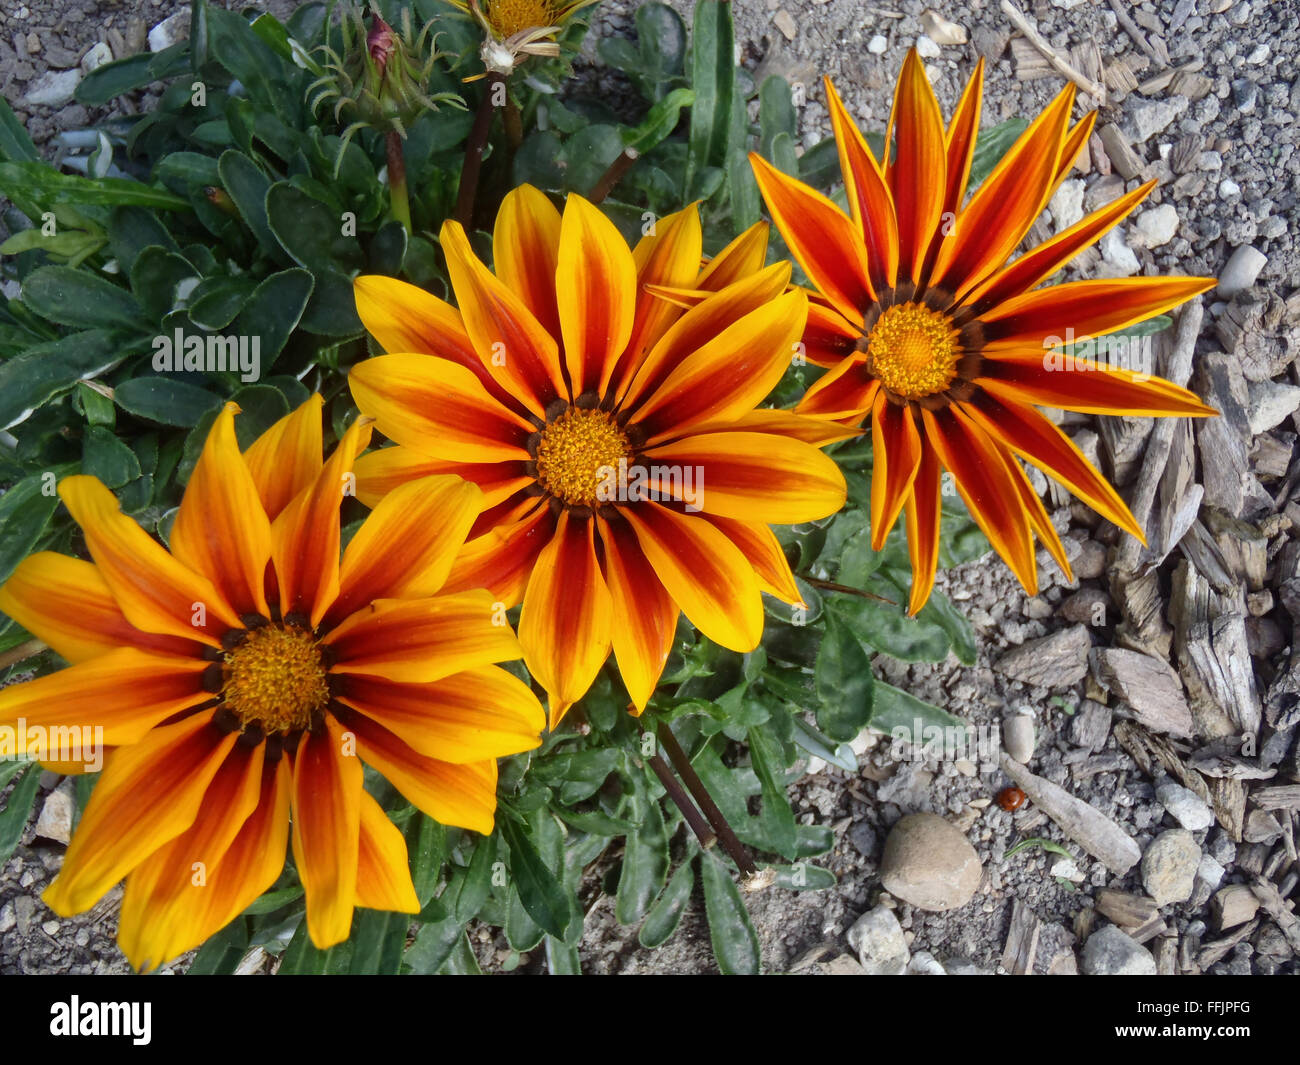 Three yellow and dark red gazania flowers at different stages of openness with rest of plant in background, on chalk soil Stock Photo